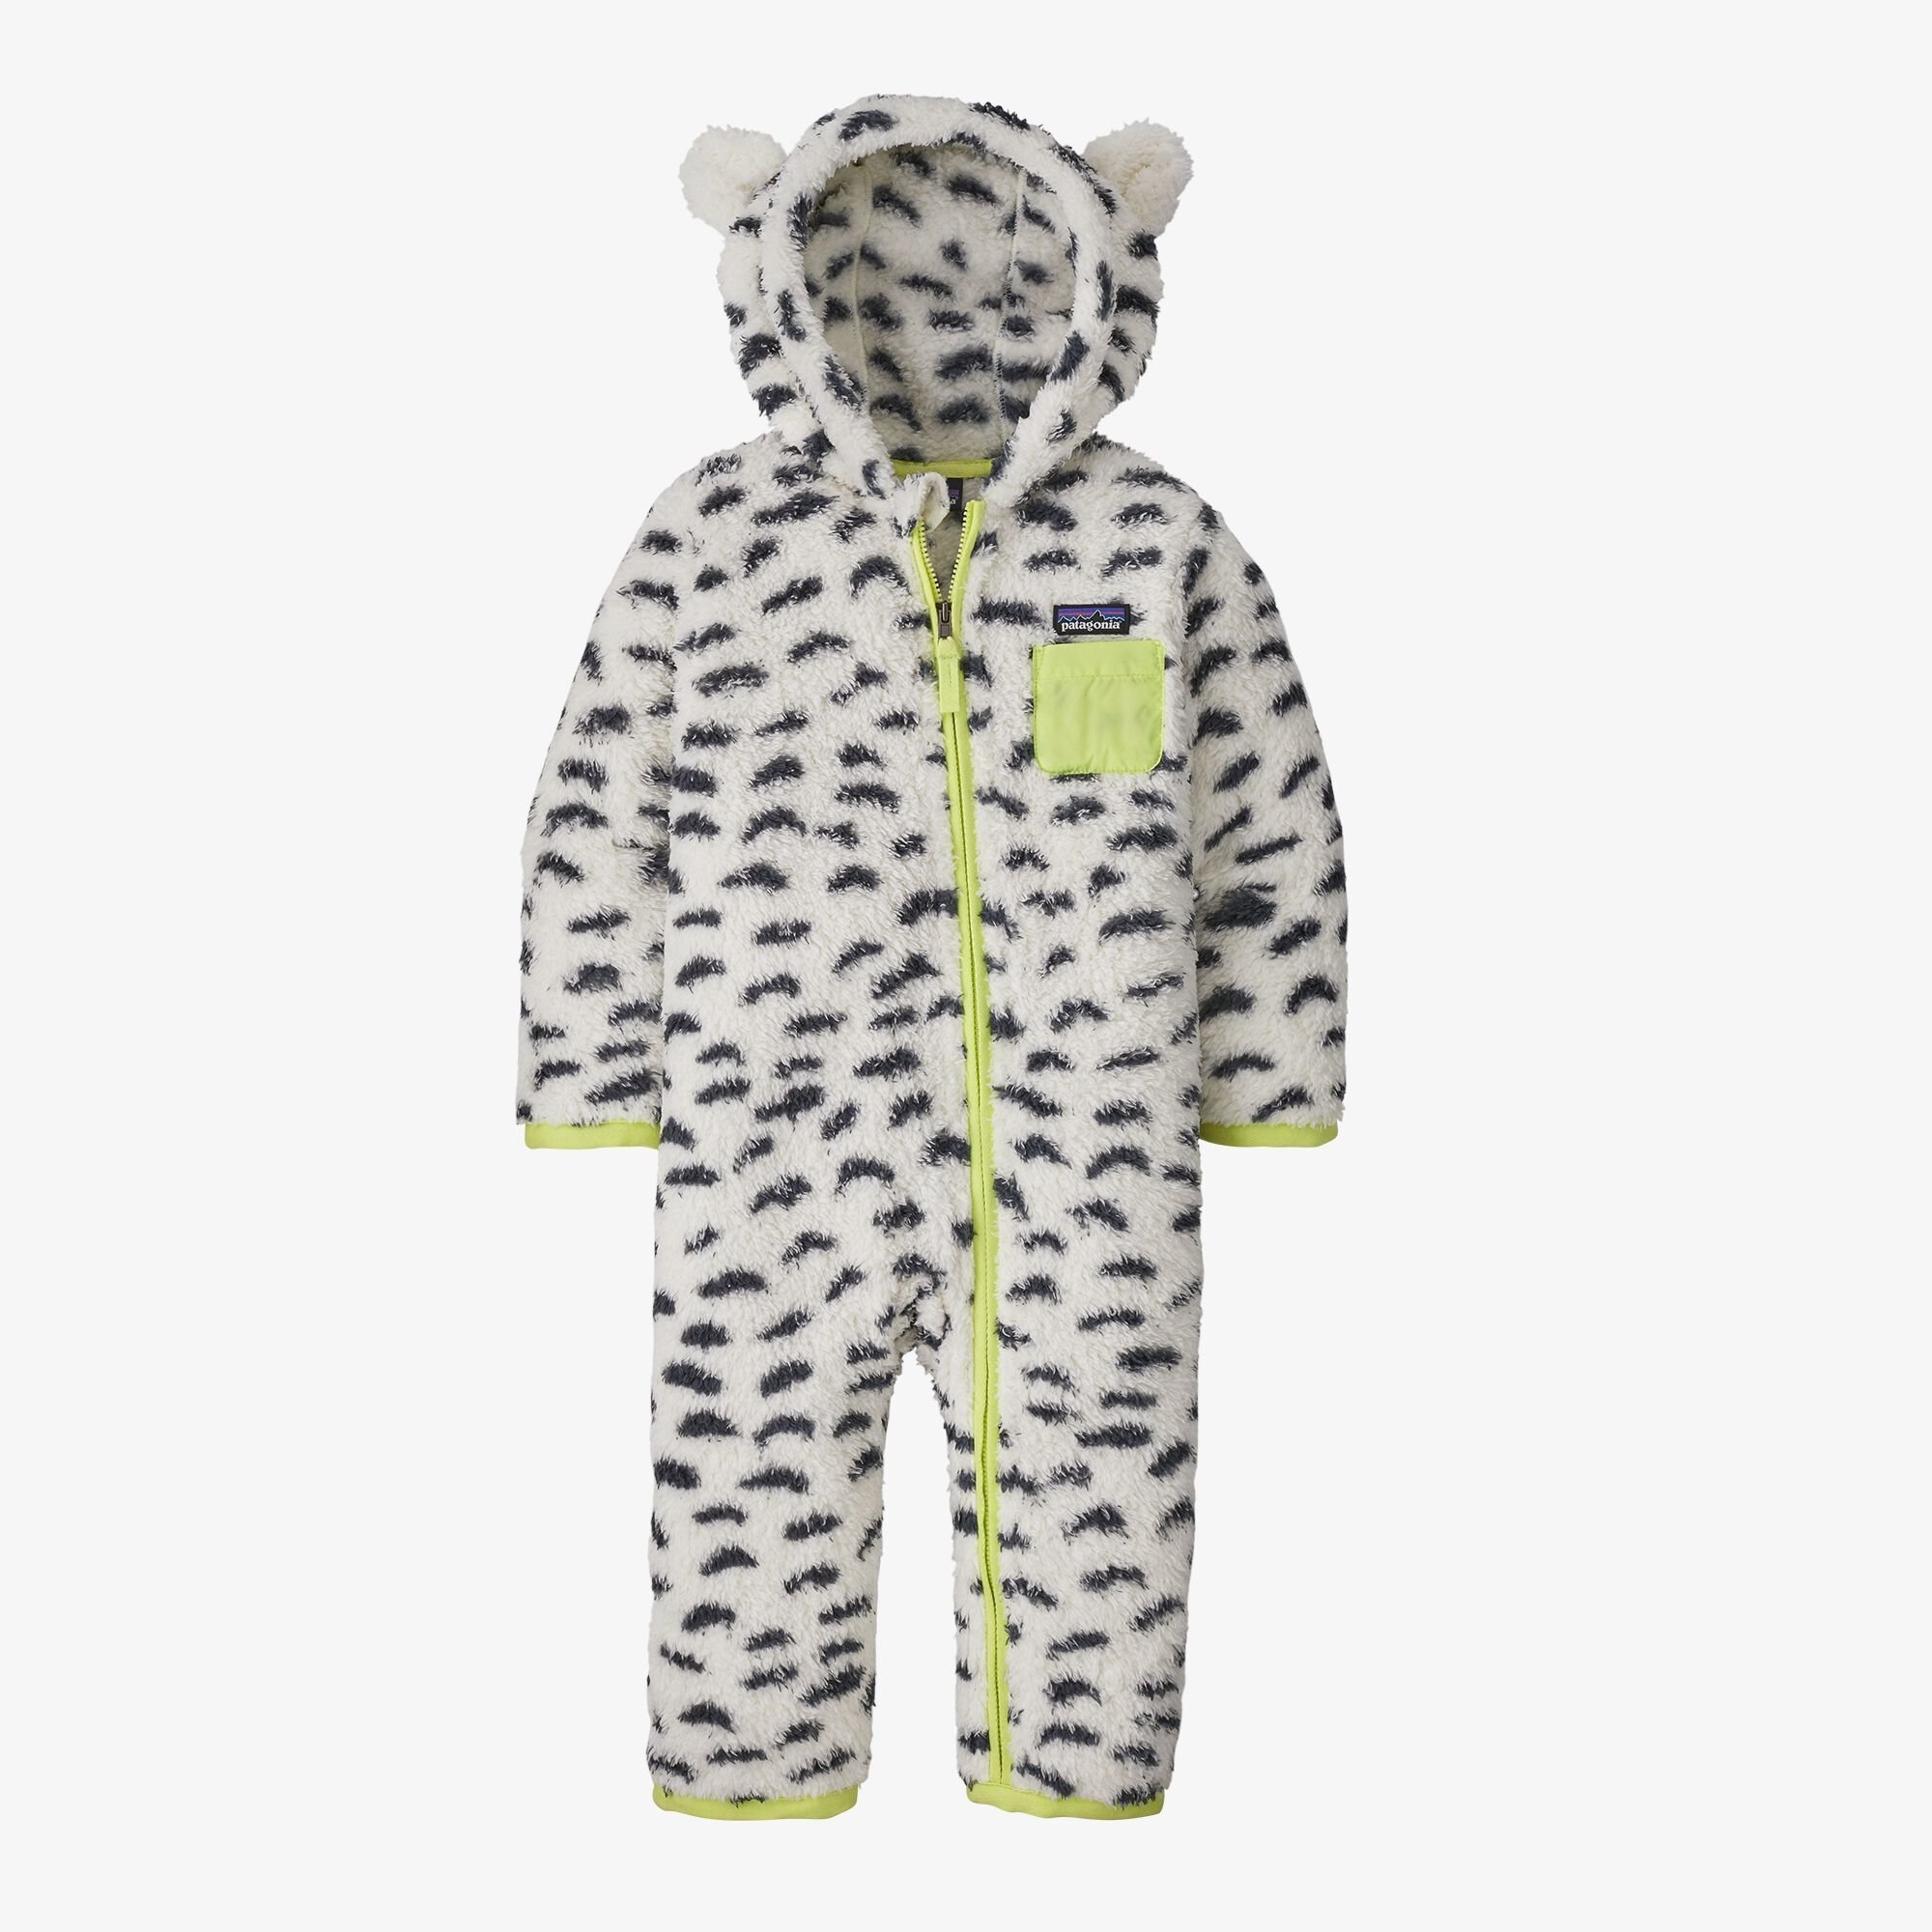 Patagonia Toddler Furry Friends Bunting - Yellow Turtle